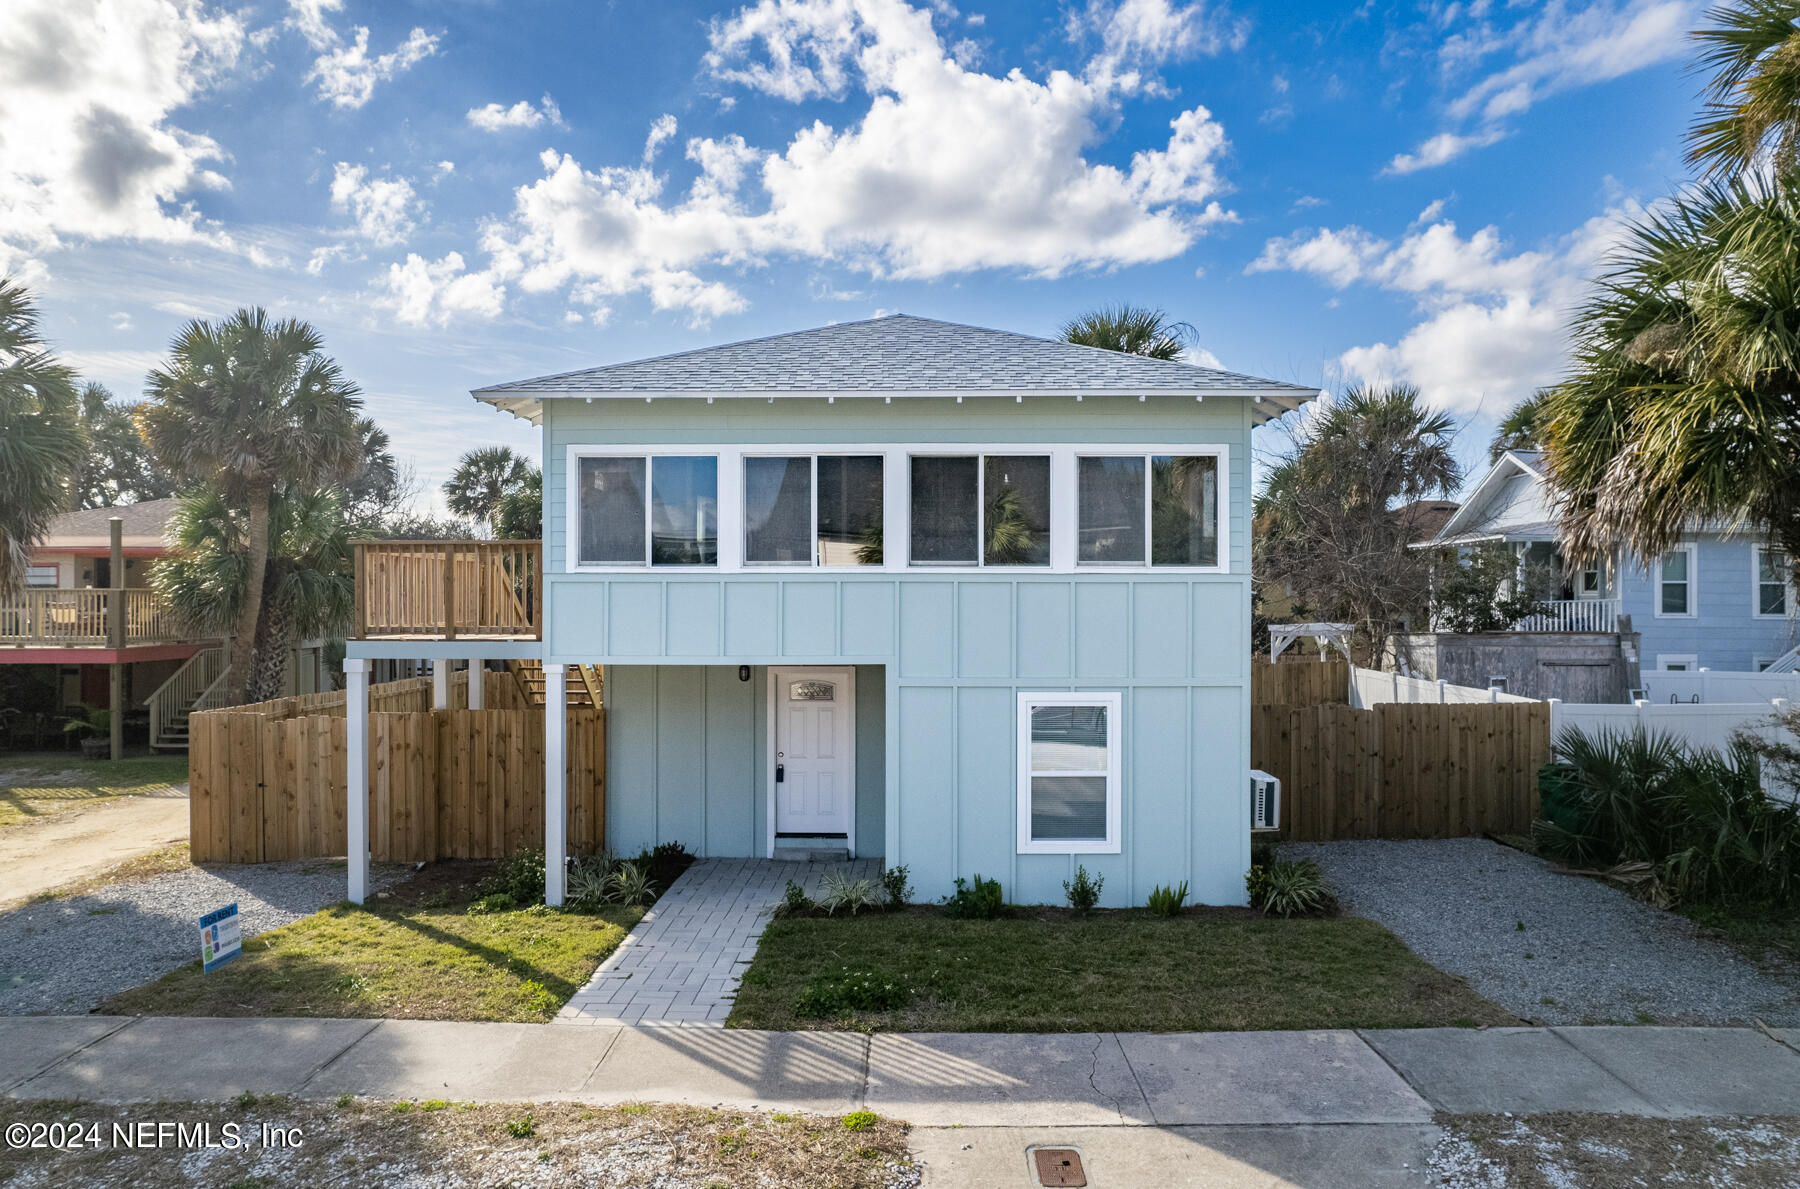 Jacksonville Beach, FL home for sale located at 714 2nd Street S, Jacksonville Beach, FL 32250